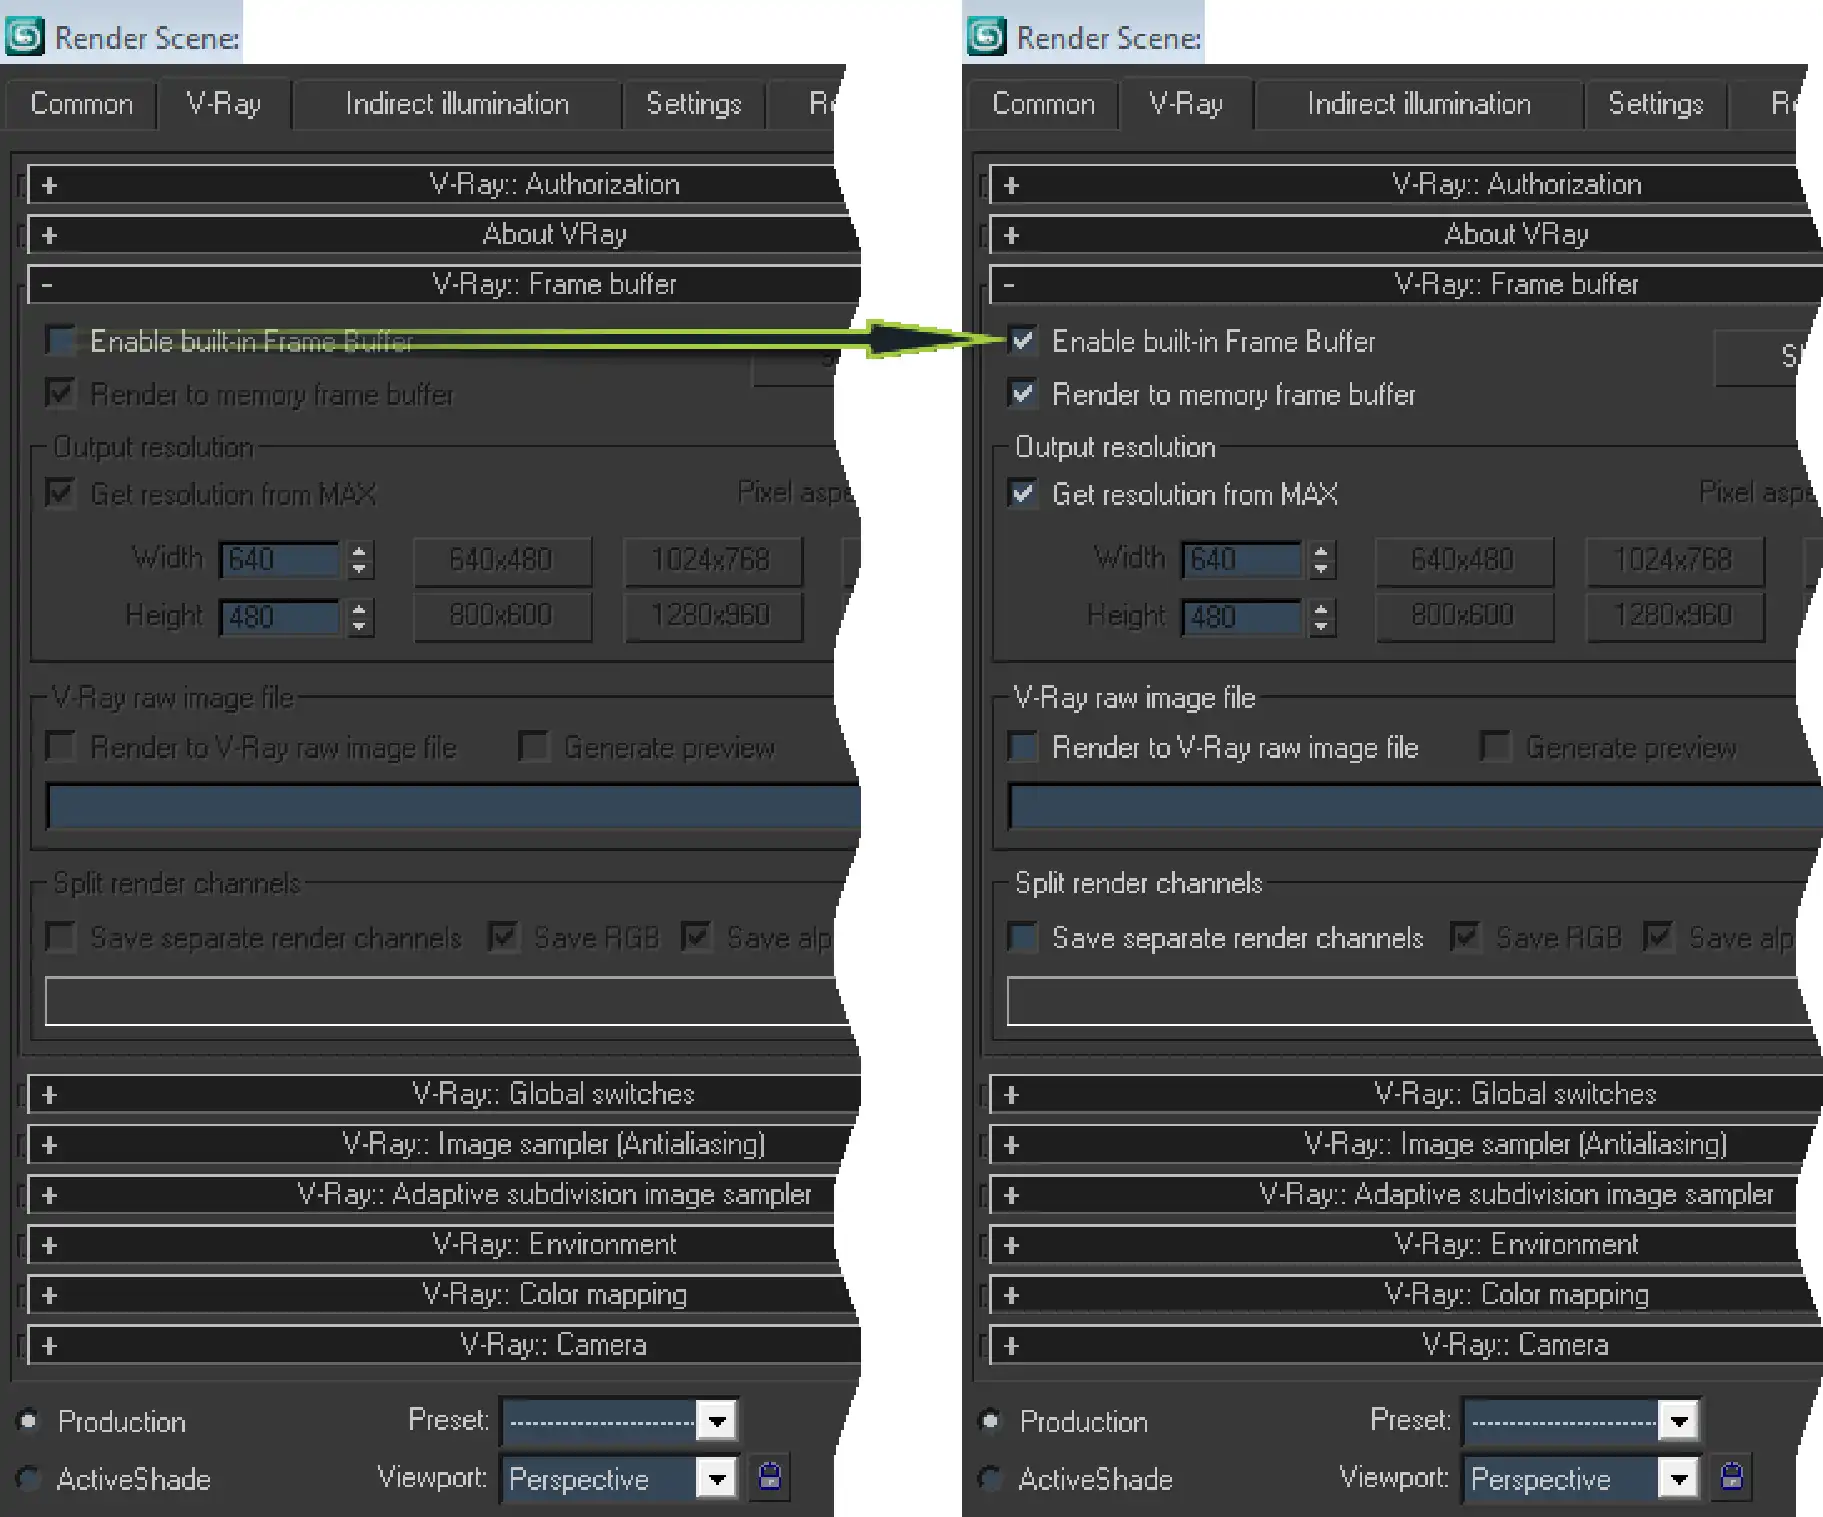 Instruction of how to Enable build-in Frame buffer of V-Ray. Screenshot of Render Scene 3ds Max dialog.